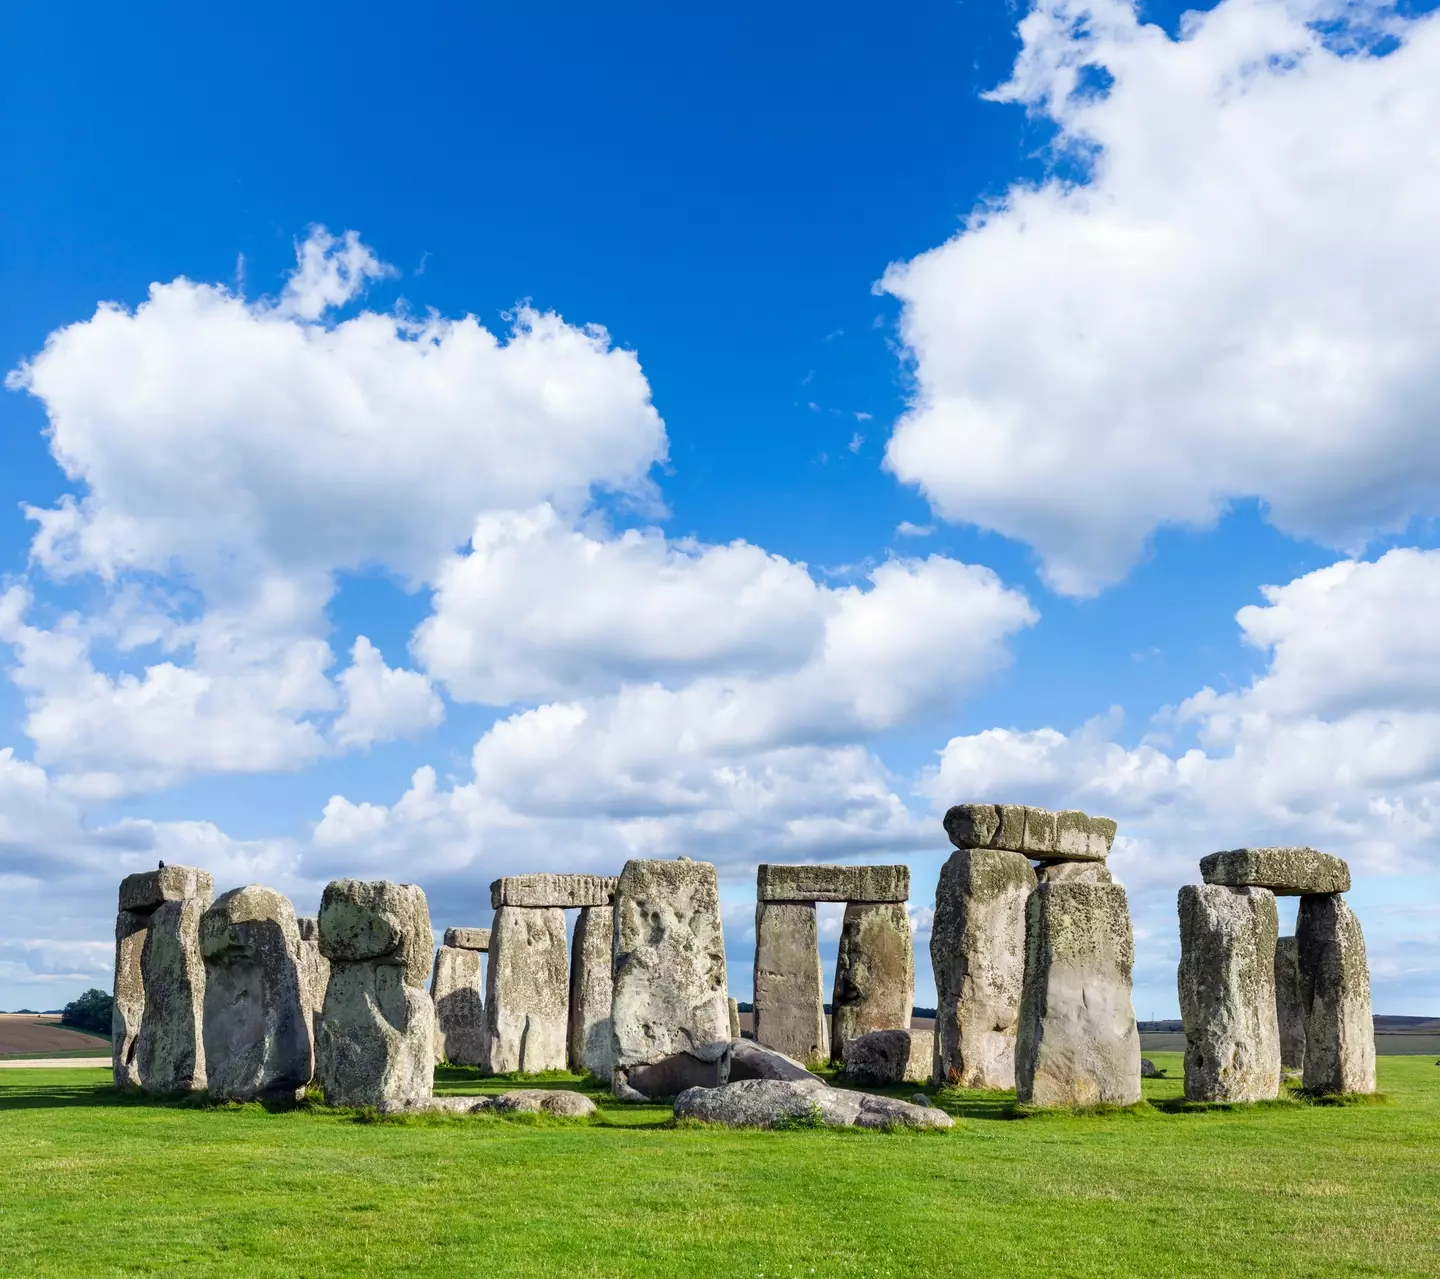 Stonehenge is one of the most famous megalithic complexes in Europe.